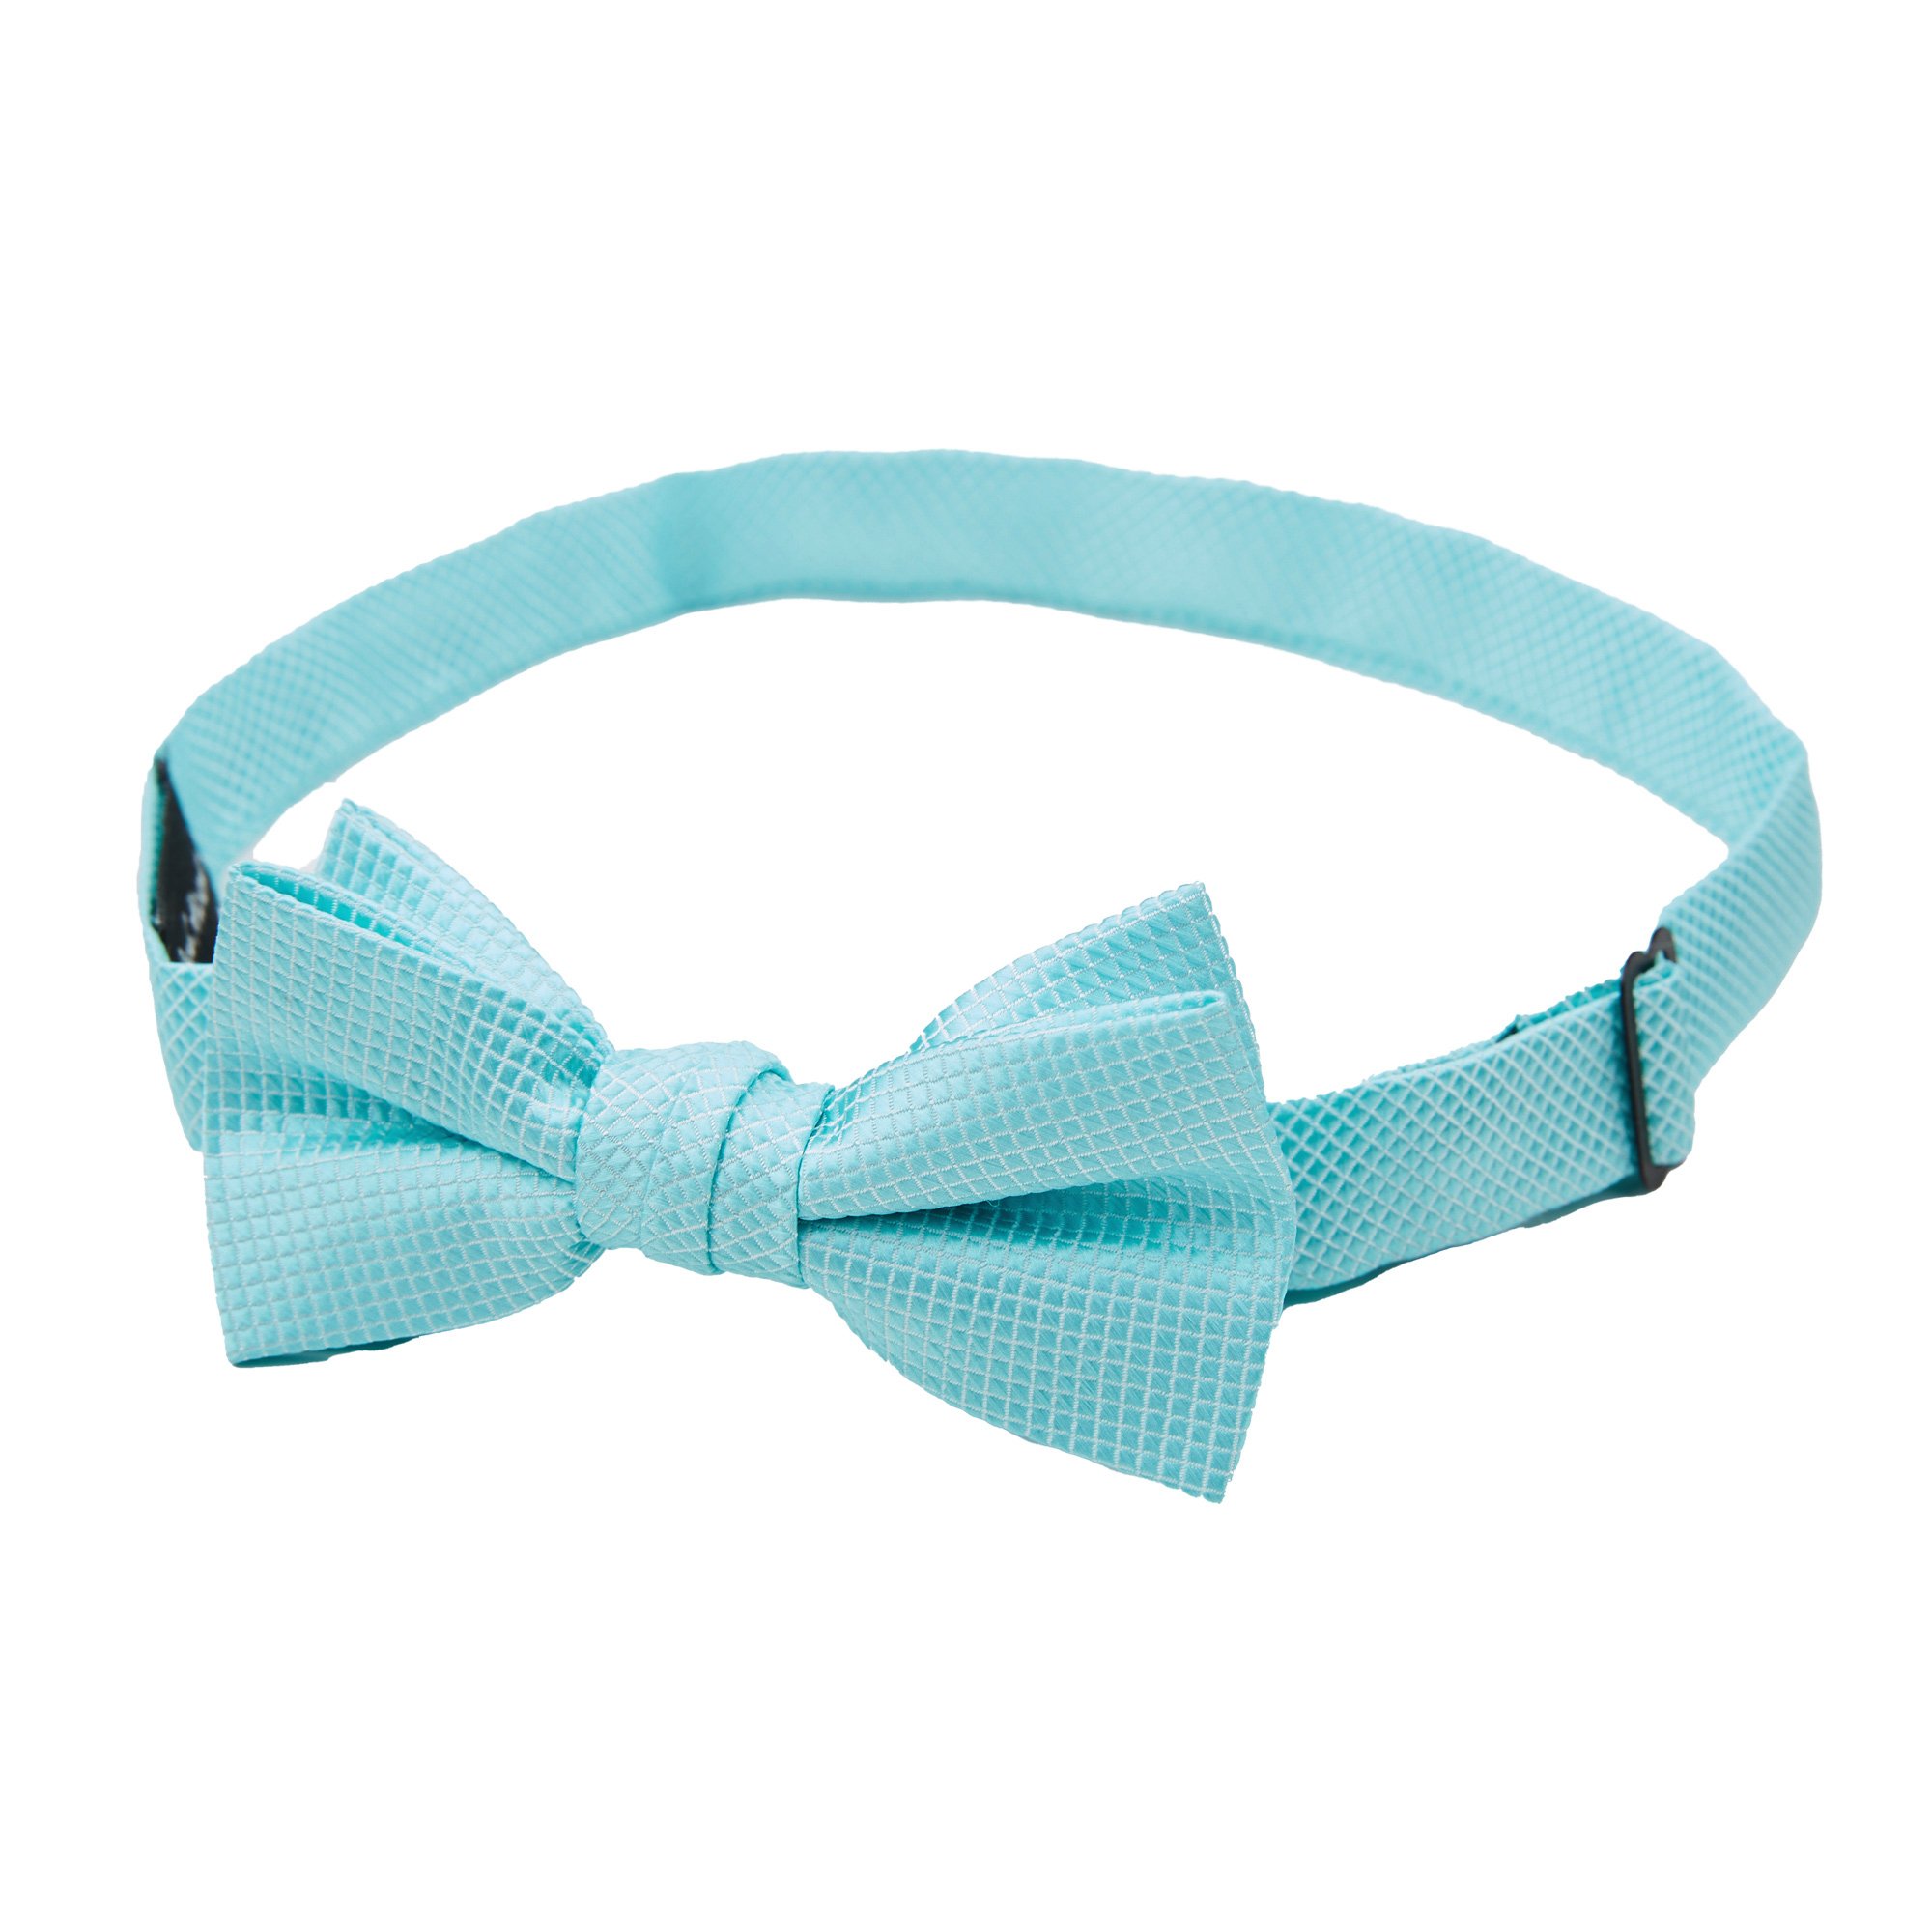 4 Piece Set: Jacob Alexander Men and Young Boys' Woven Subtle Mini Squares Self-Tie Bow Tie Adjustable Pre-Tied Banded Bow Tie and Pocket Squares - Light Turquoise - image 3 of 7